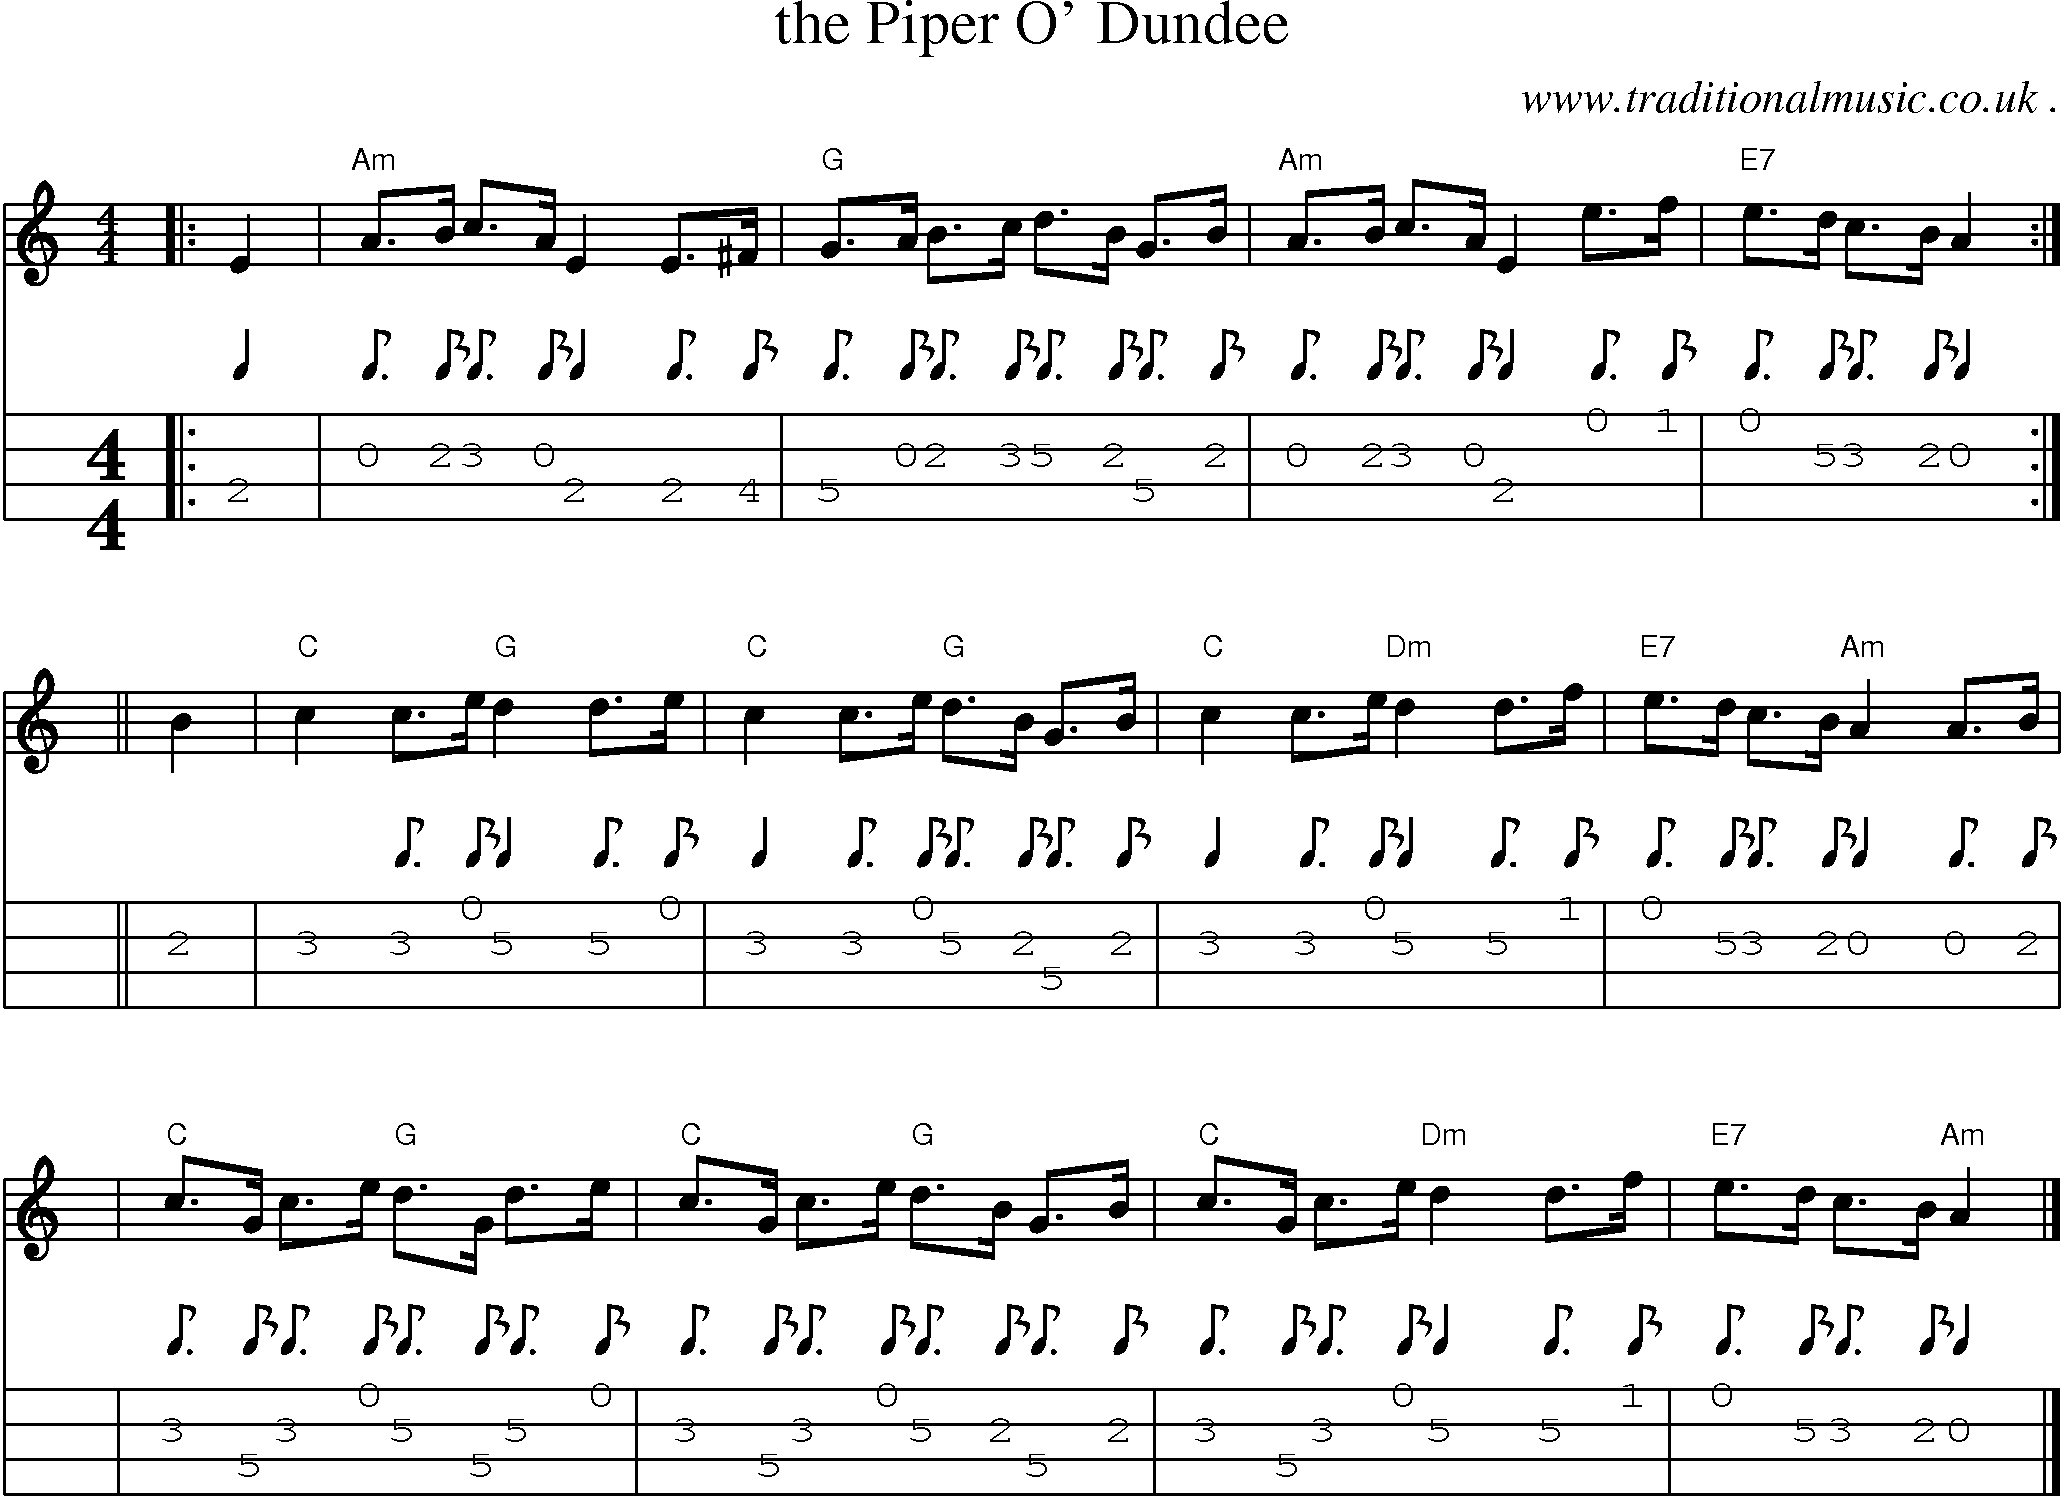 Sheet-music  score, Chords and Mandolin Tabs for The Piper O Dundee